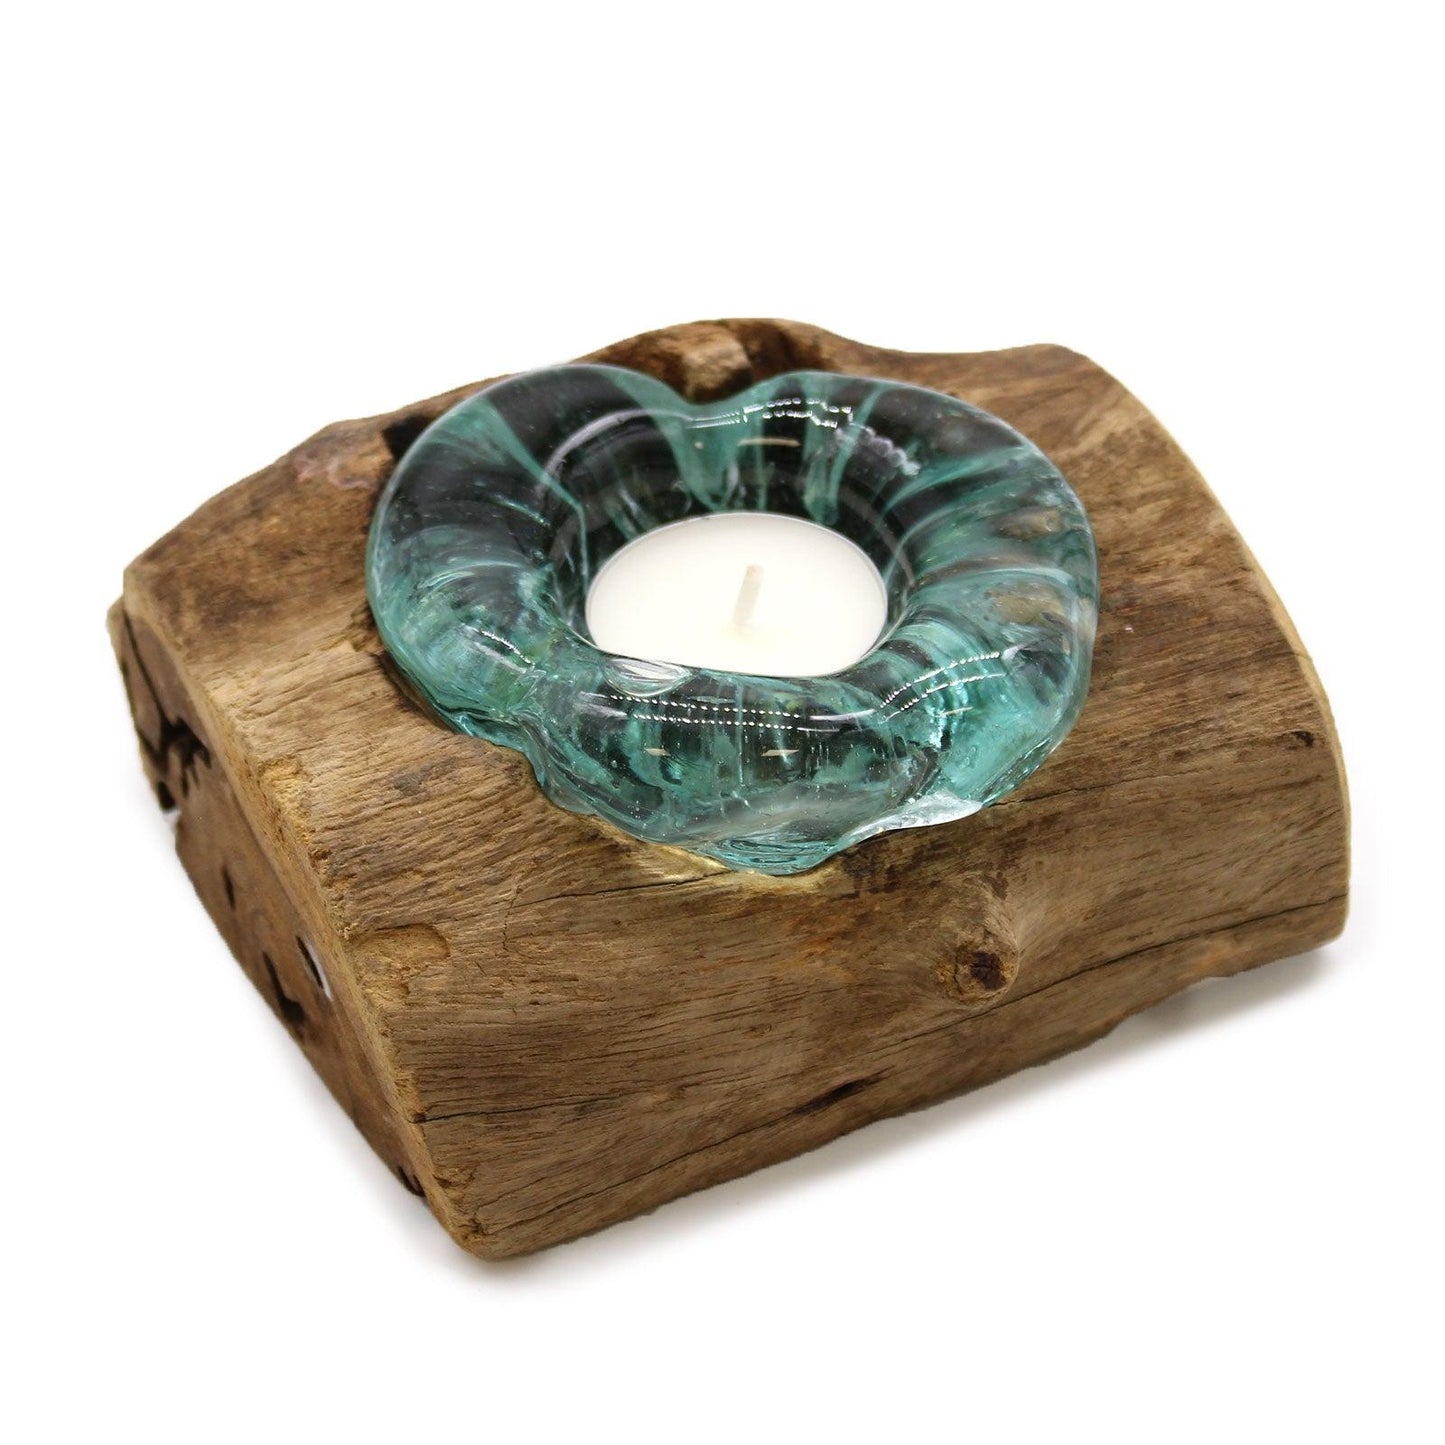 Molton Glass Candle Single Holder on Wood - DuvetDay.co.uk